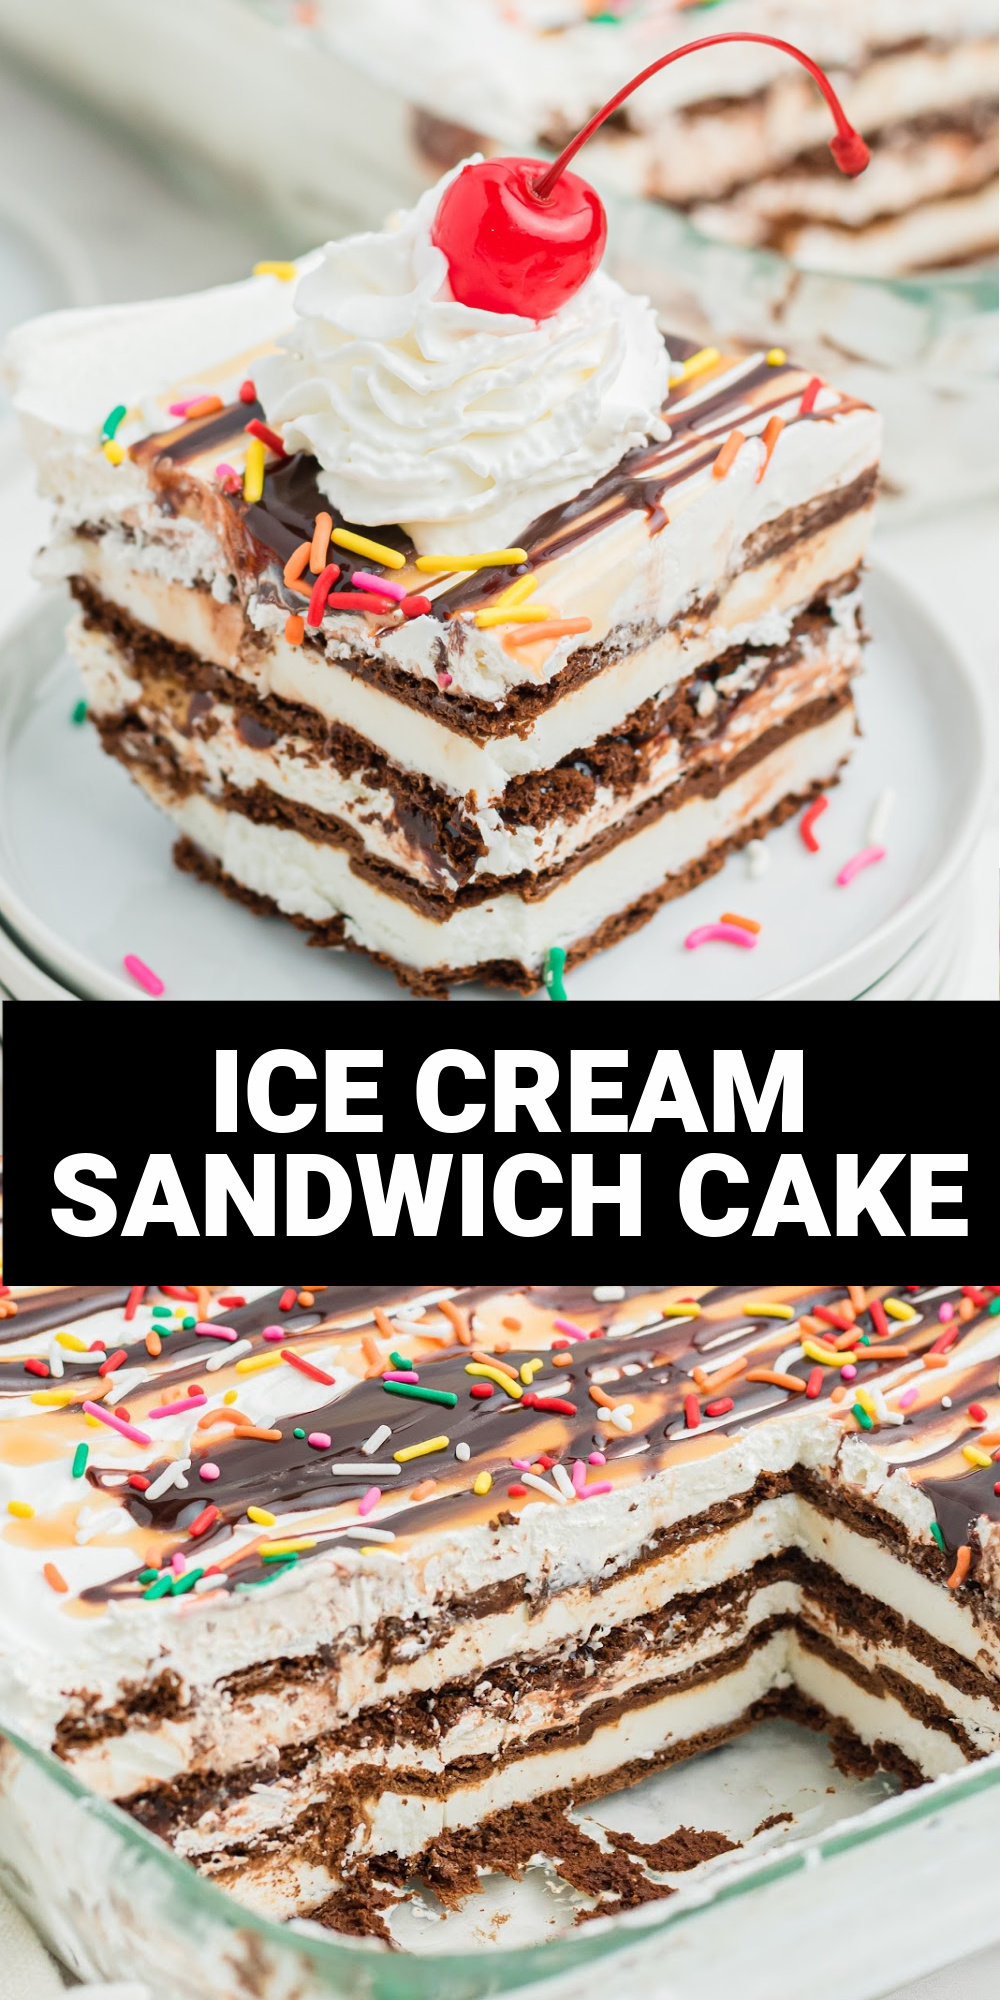 This ice cream sandwich cake is such an easy and fun dessert that's perfect for summer! It only takes 5 ingredients and about 5 minutes to whip up this creamy chocolate and vanilla frozen ice cream dessert that's absolutely delicious!